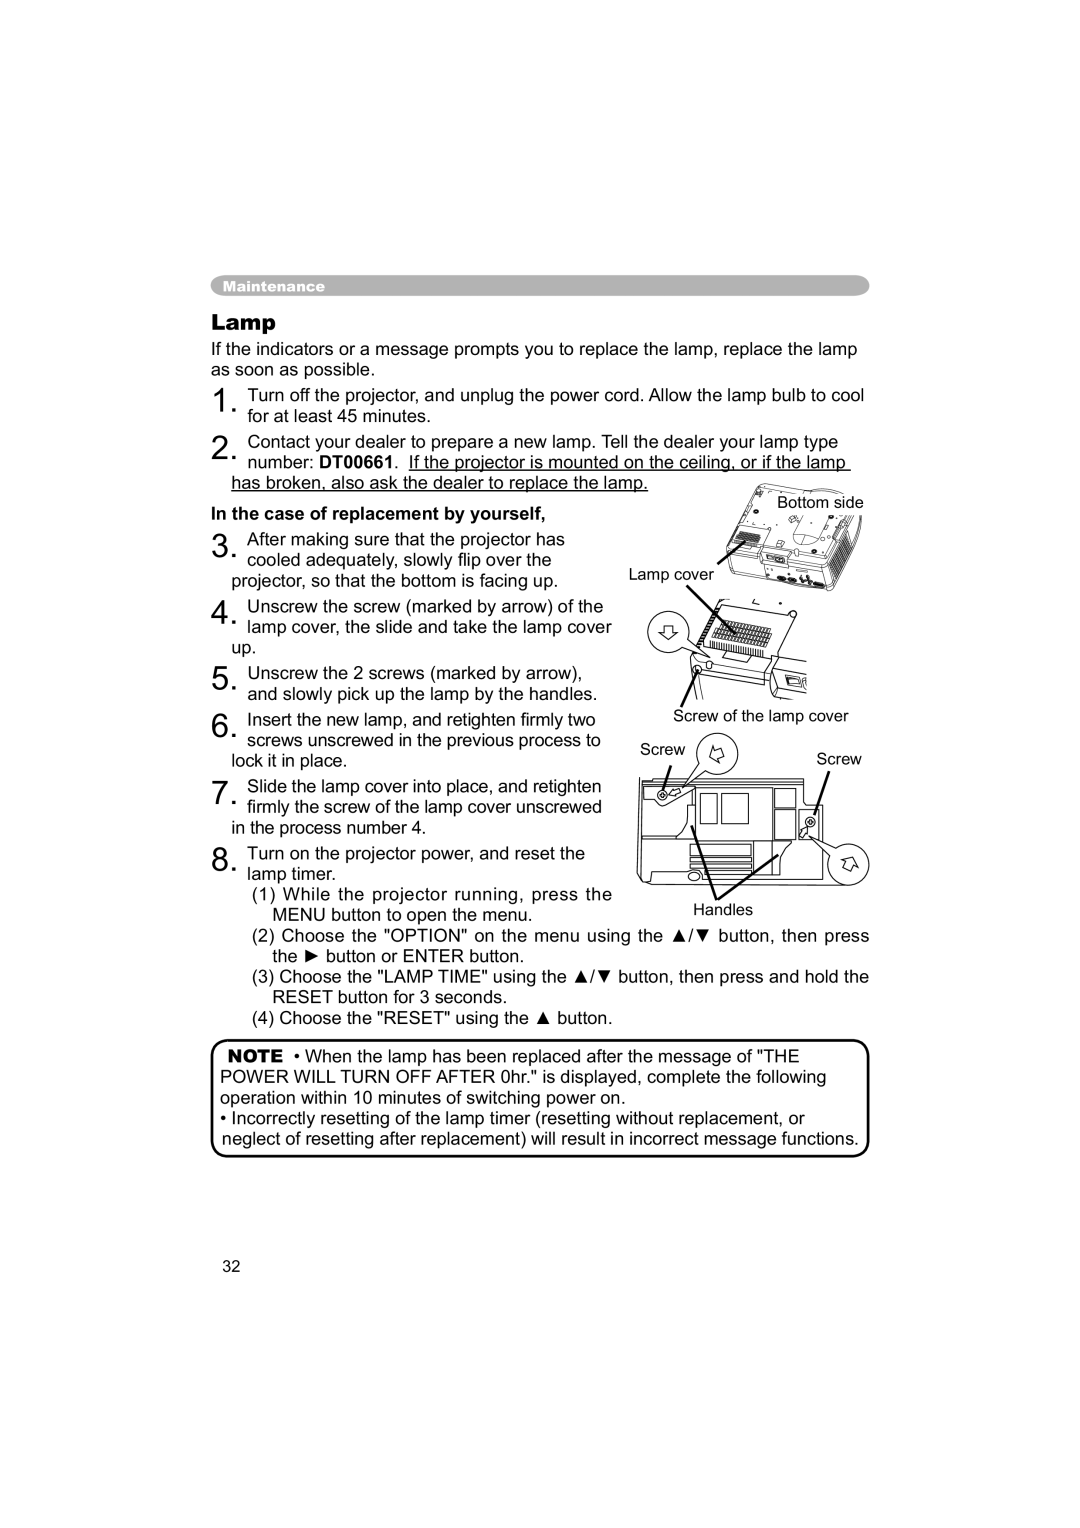 Hitachi PJ-TX100 user manual Lamp, In the case of replacement by yourself 